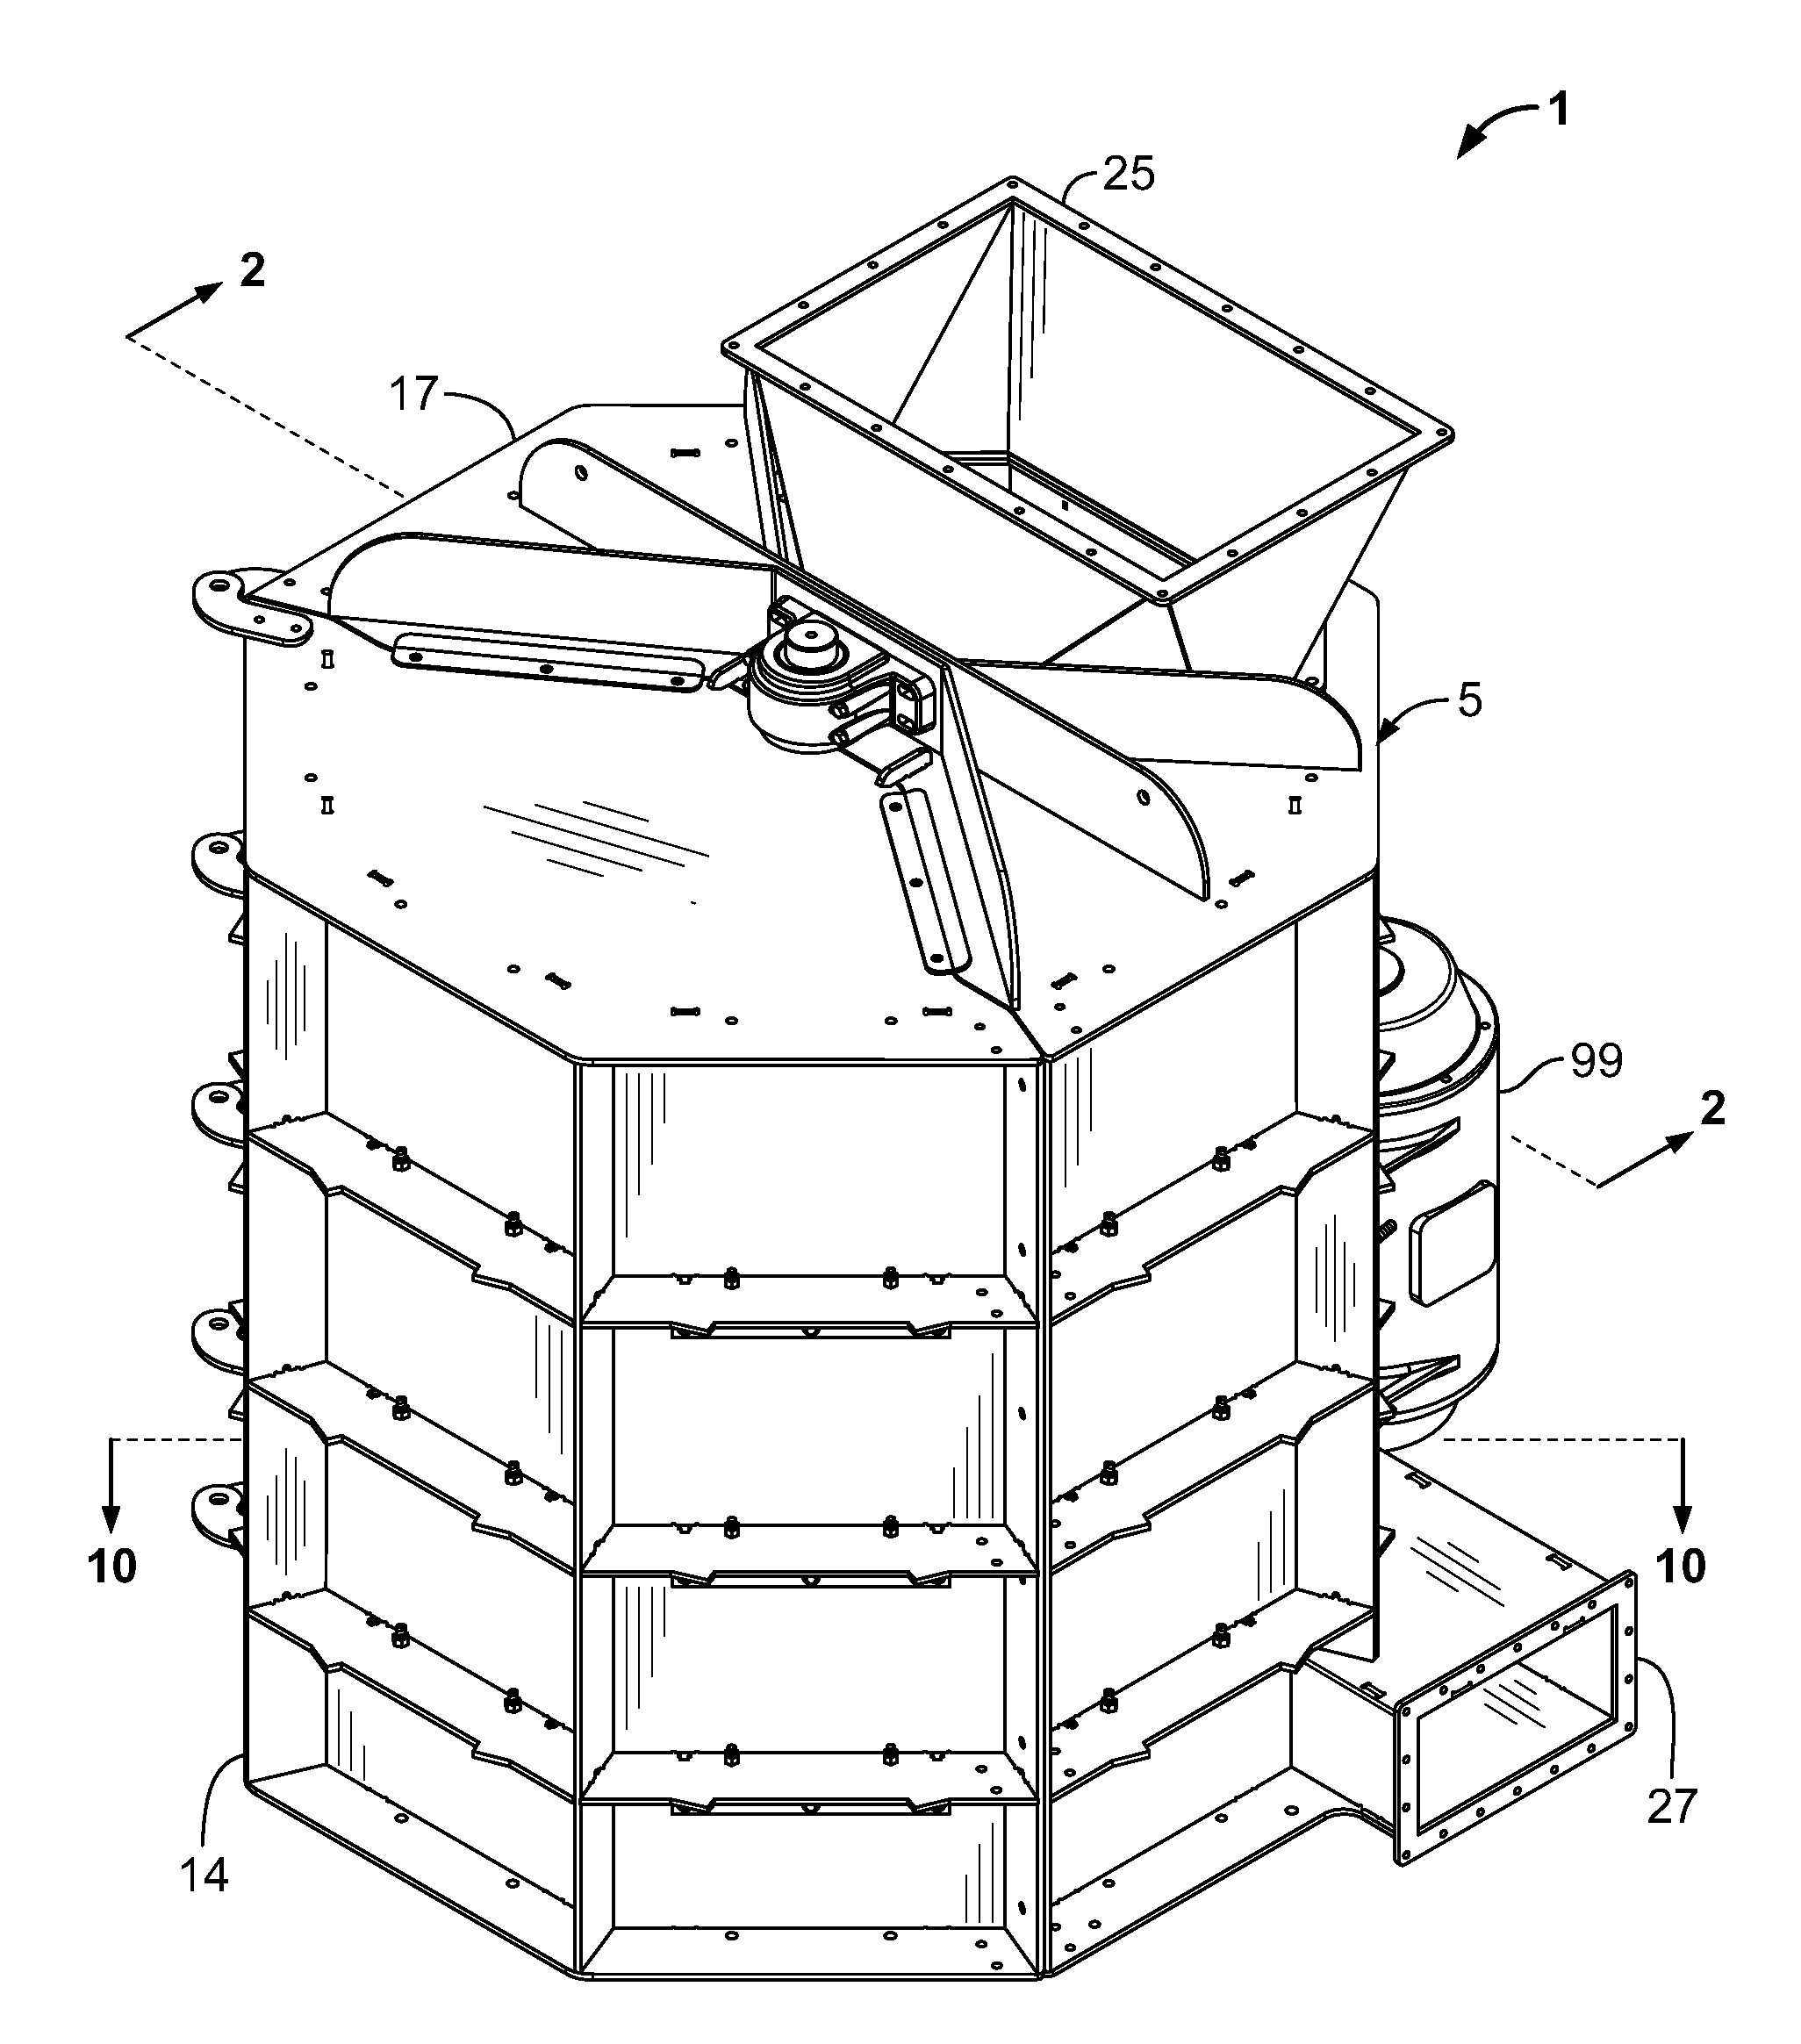 Apparatus and process for demanufacturing materials from composite manufactures